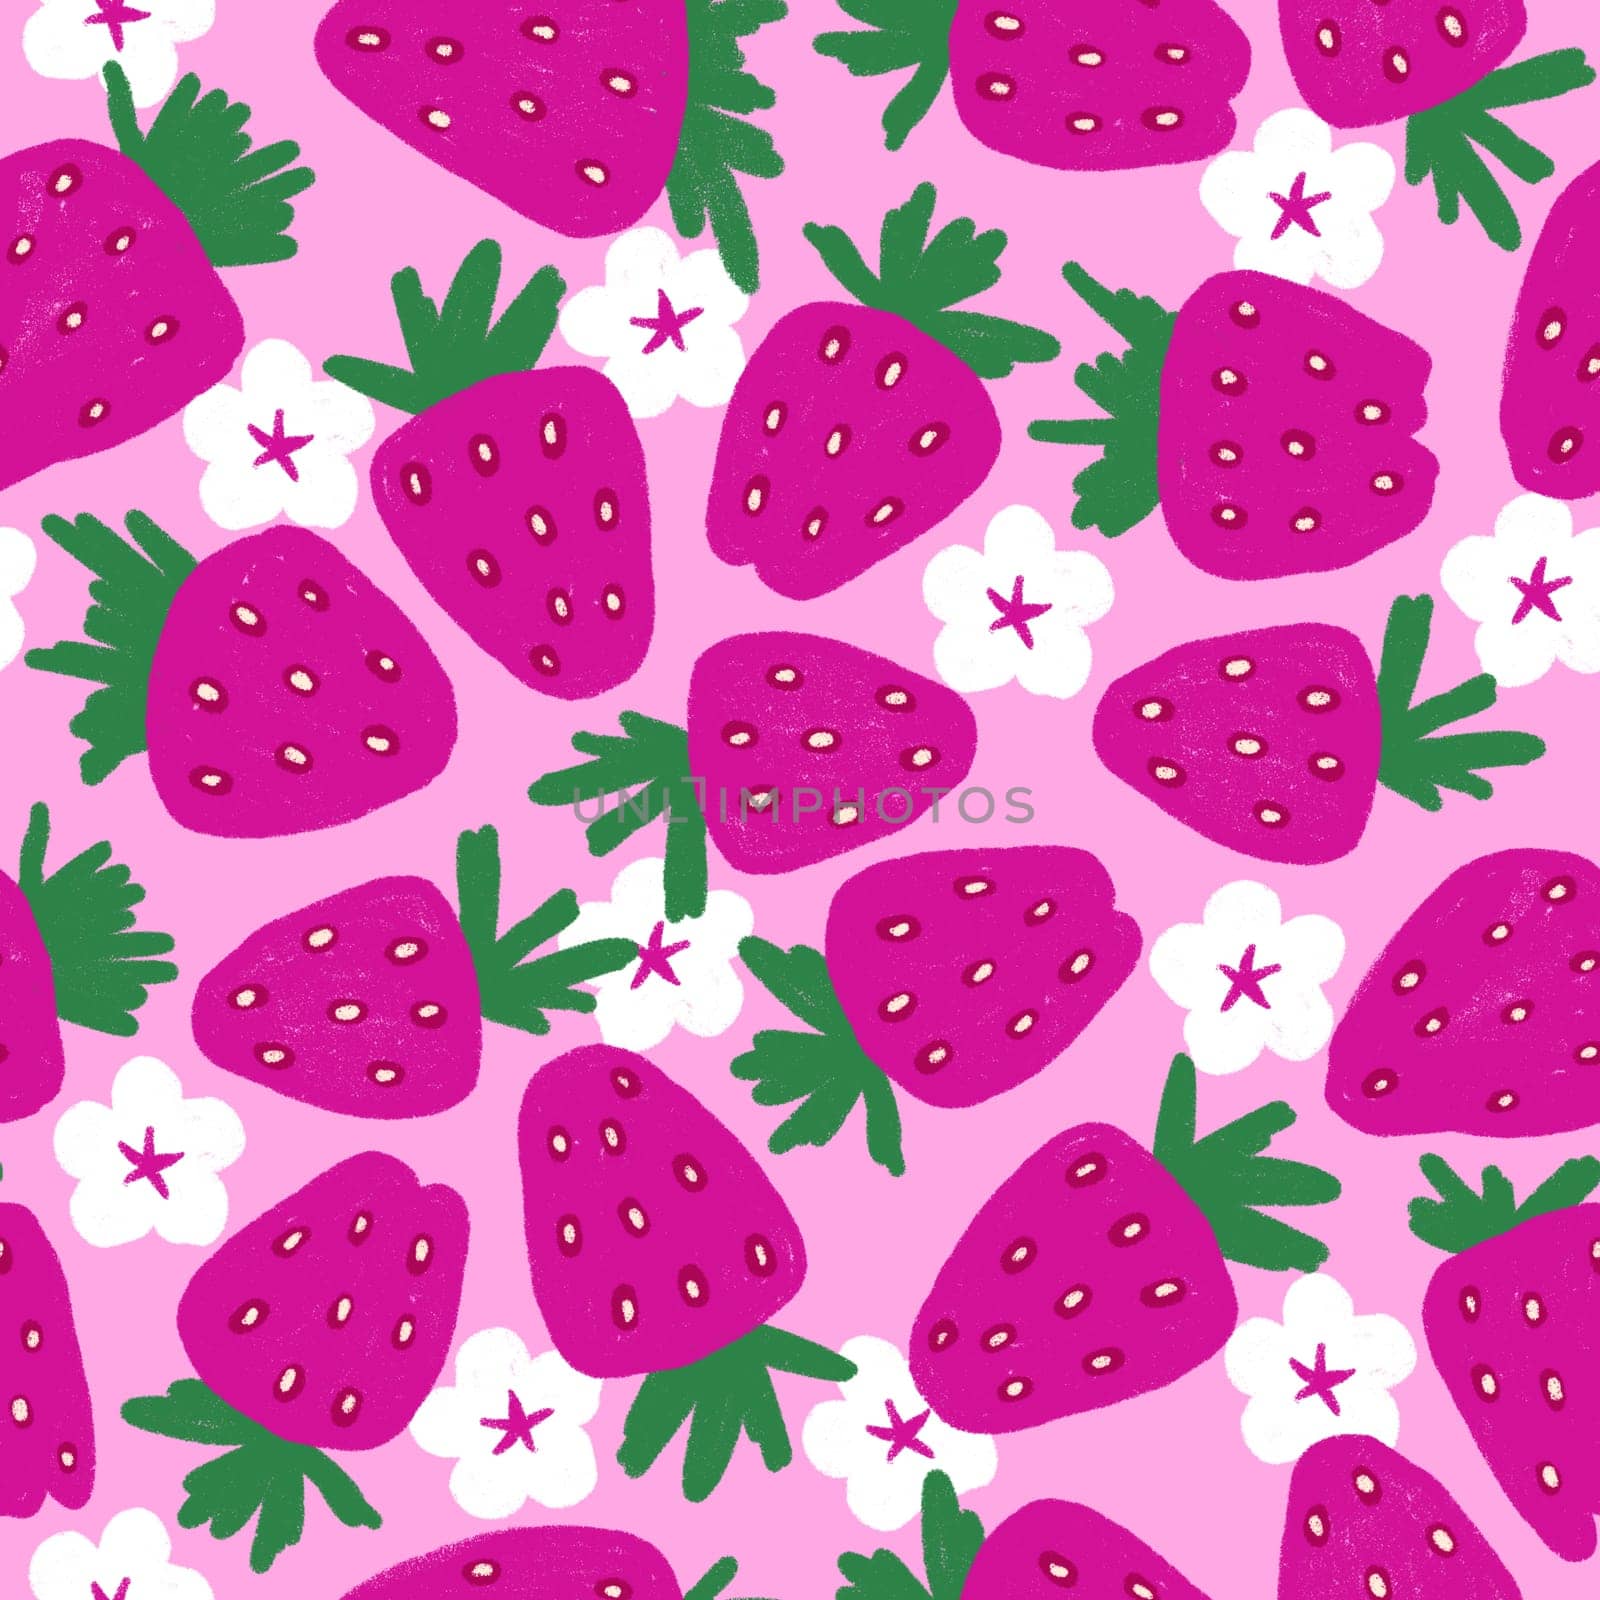 Hand drawn seamless pattern with pink strawberry with white flowers. Hot pink background Summer picnic food fruit berry print, fresh food strawberries green leaves, colorful bright spring kitchen design.. by Lagmar